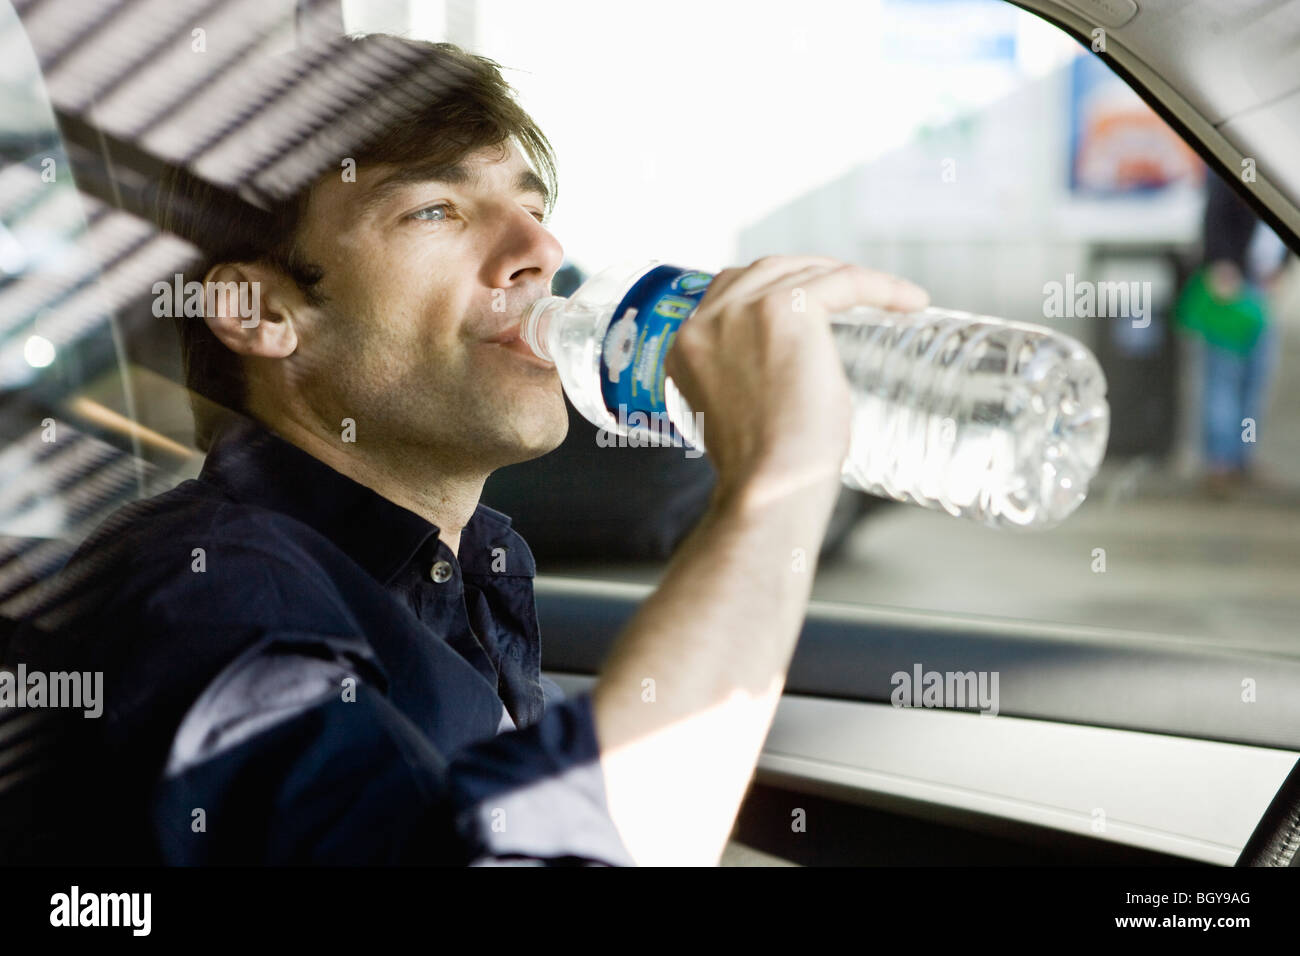 Man drinking bottled water while driving Stock Photo